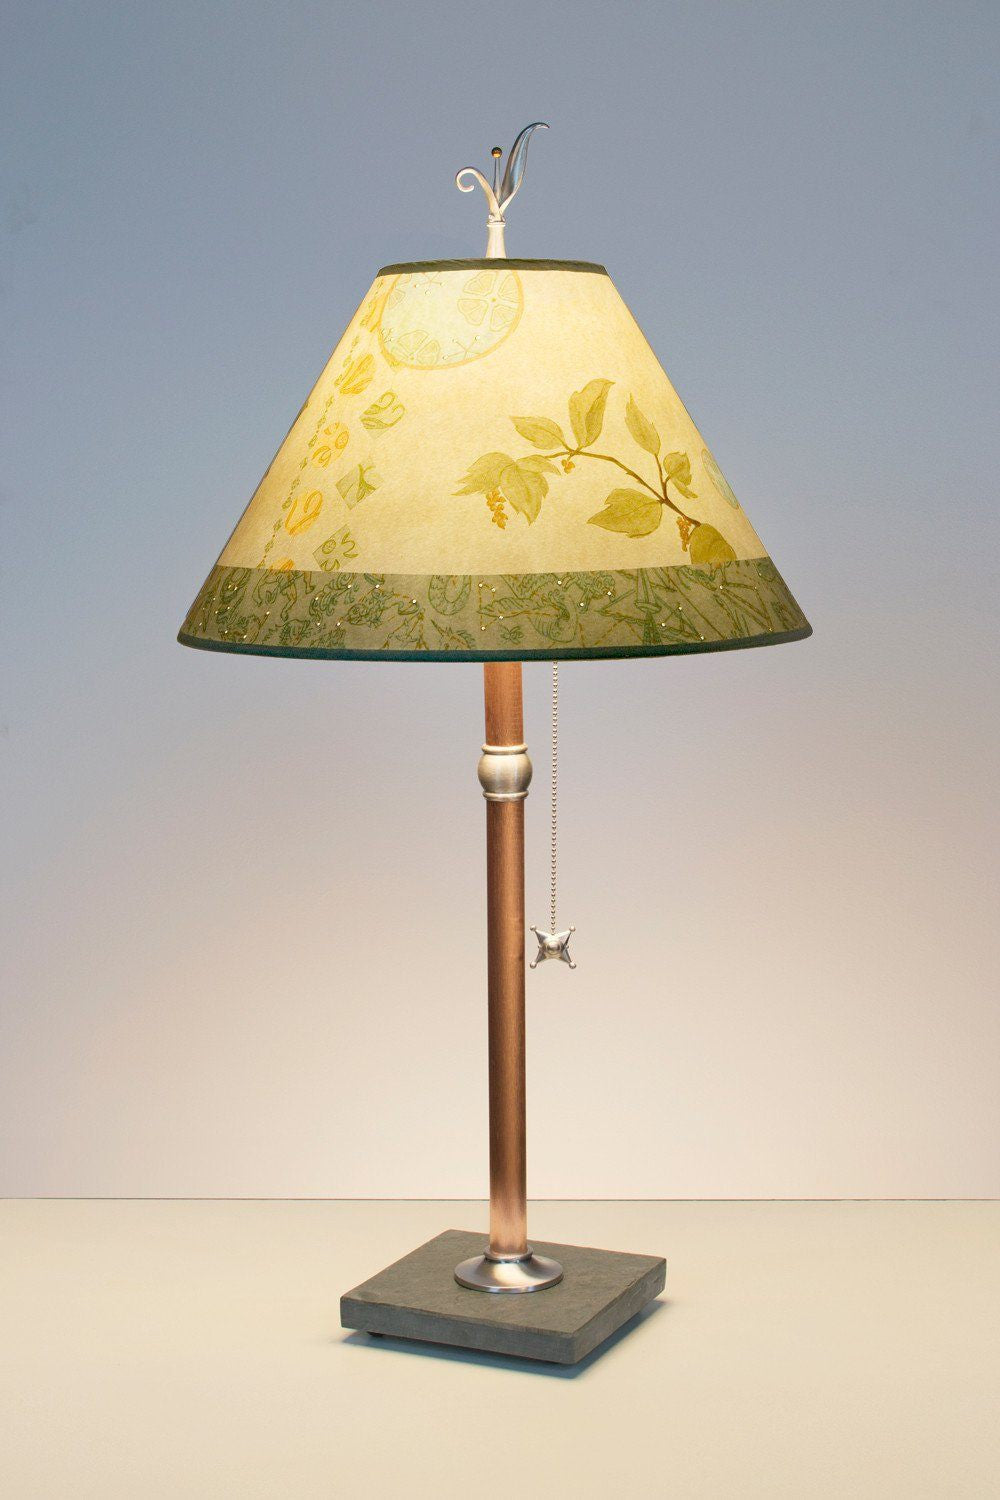 Janna Ugone &amp; Co Table Lamps Copper Table Lamp with Medium Conical Shade in Celestial Leaf